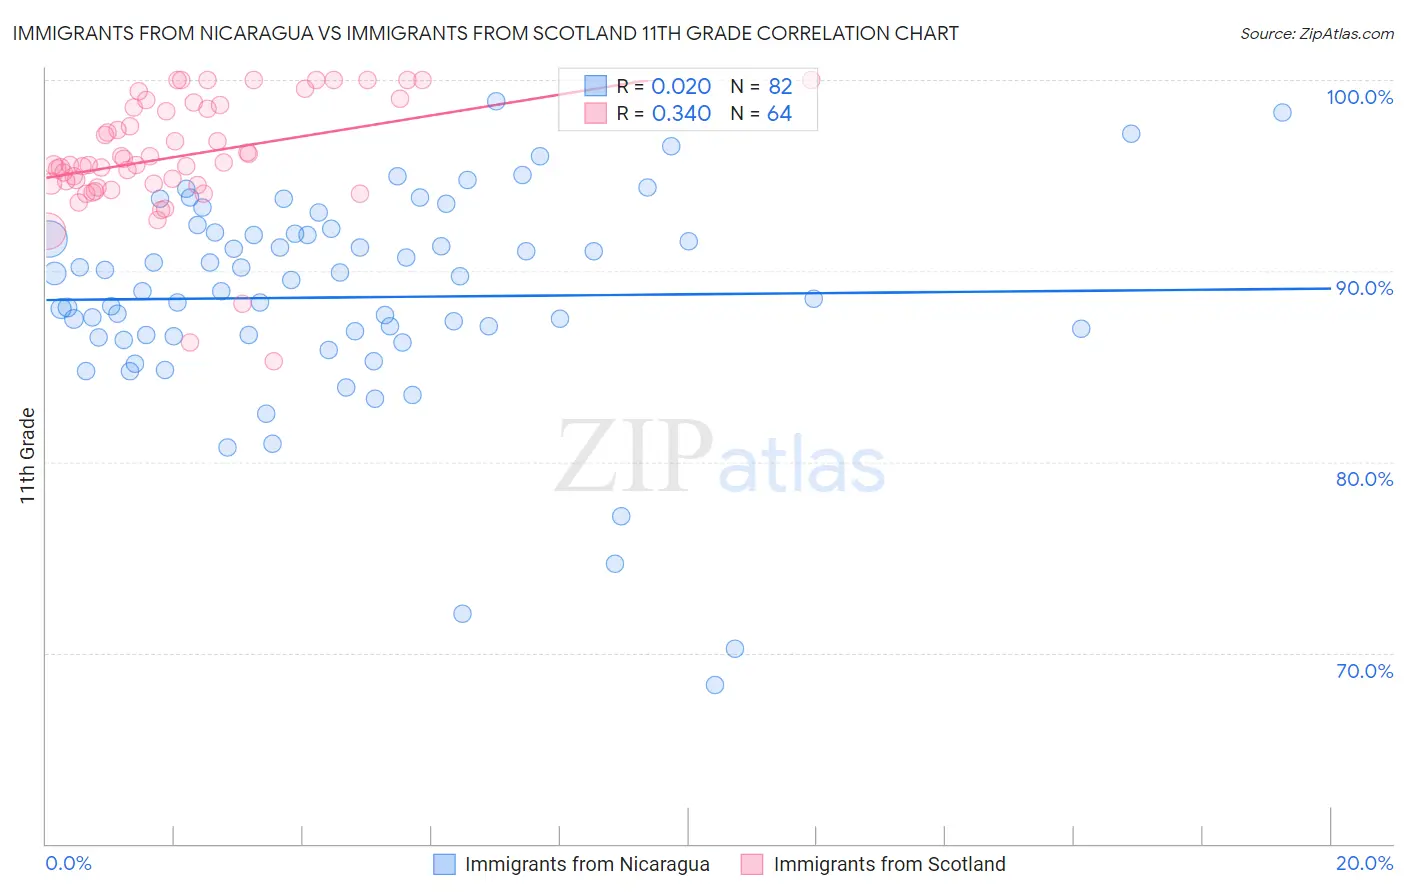 Immigrants from Nicaragua vs Immigrants from Scotland 11th Grade